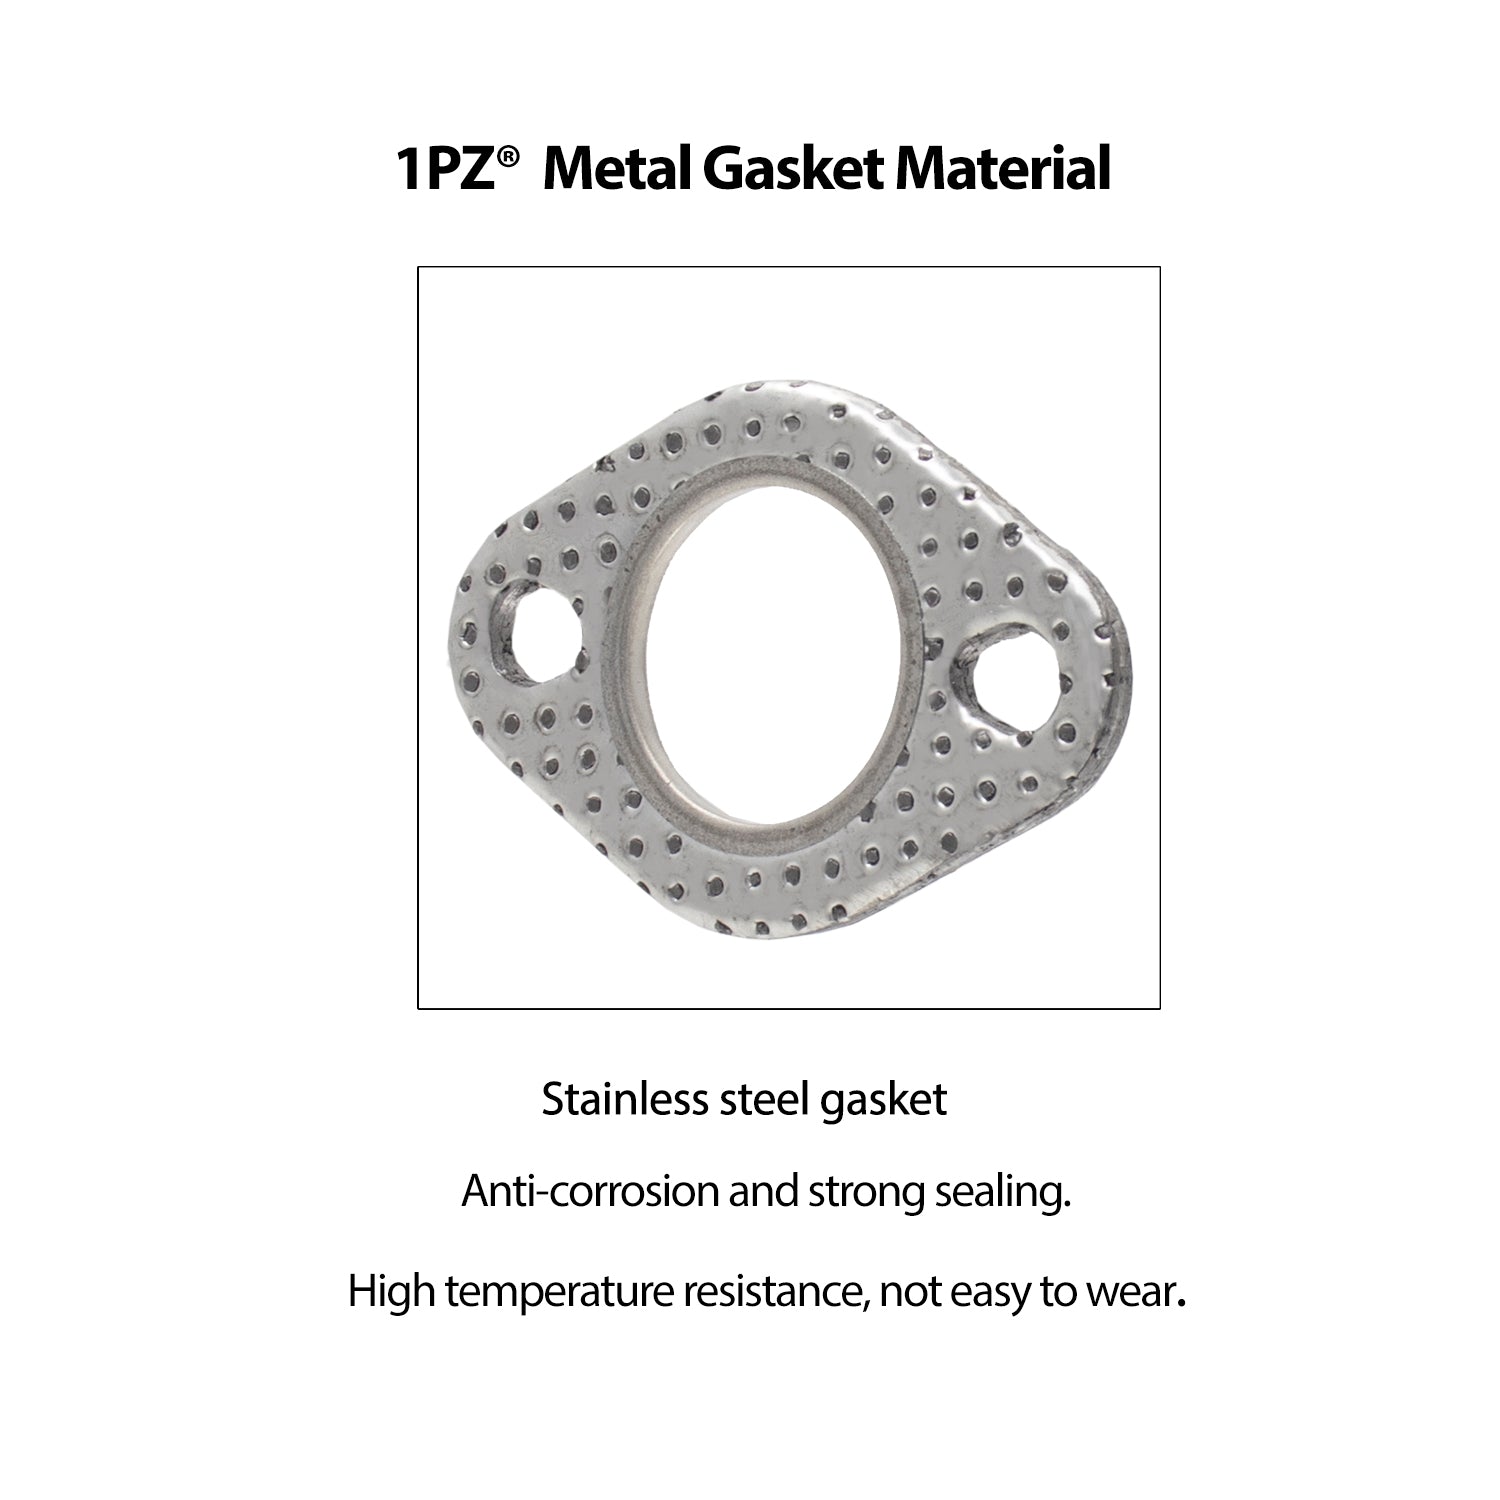 1PZ Premium Exhaust Bolt and Gasket for GY6 50cc 70cc 90cc 110cc 125cc 150cc GMB139 Engine Scooters ATV (Silver)